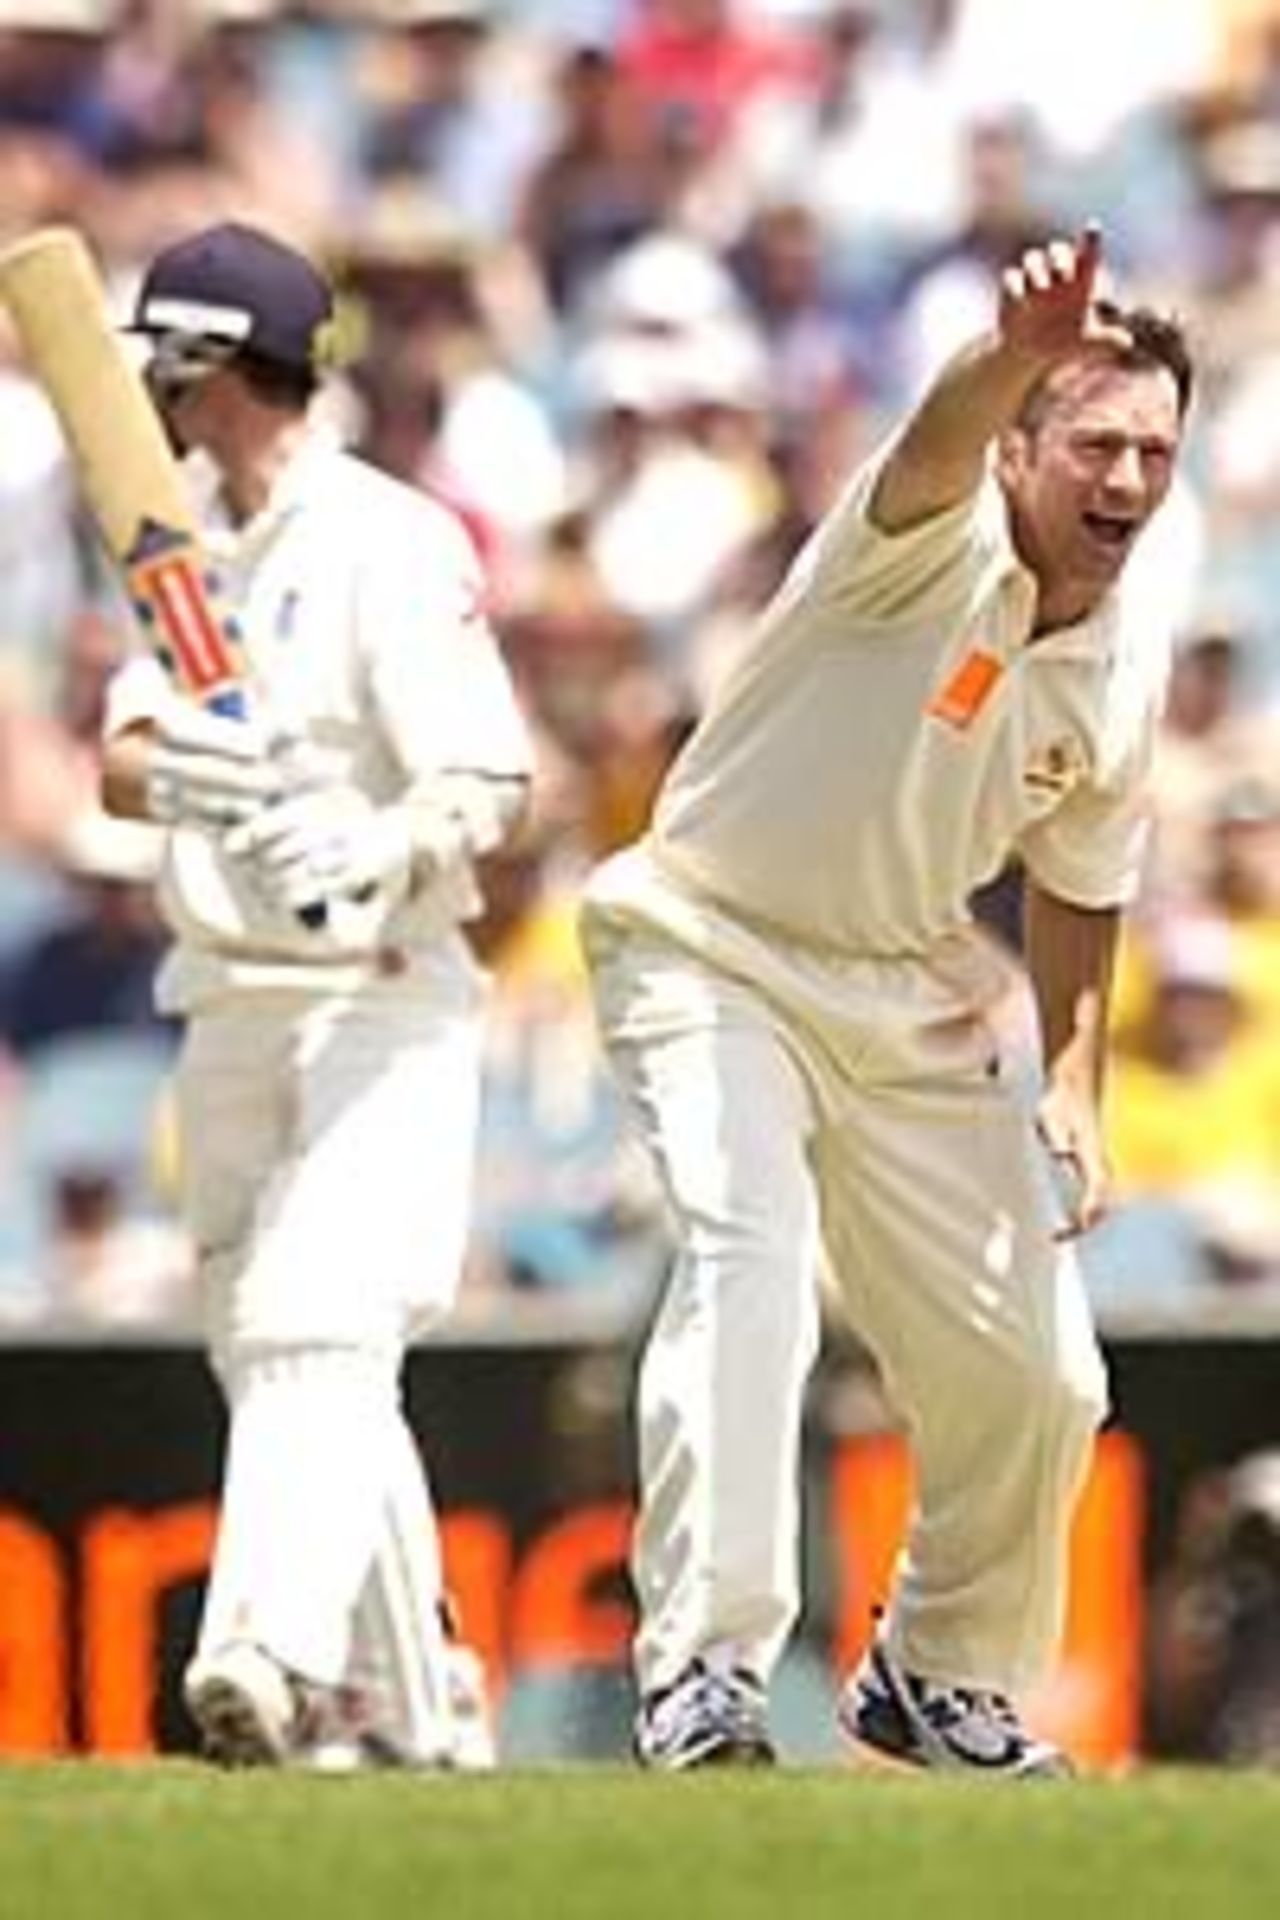 MELBOURNE - DECEMBER 28: Steve Waugh of Australia appeals for and gets the wicket of James Foster of England during the third day of the Fourth Ashes Test between Australia and England at the Melbourne Cricket Ground, Melbourne, Australia on December 28, 2002.